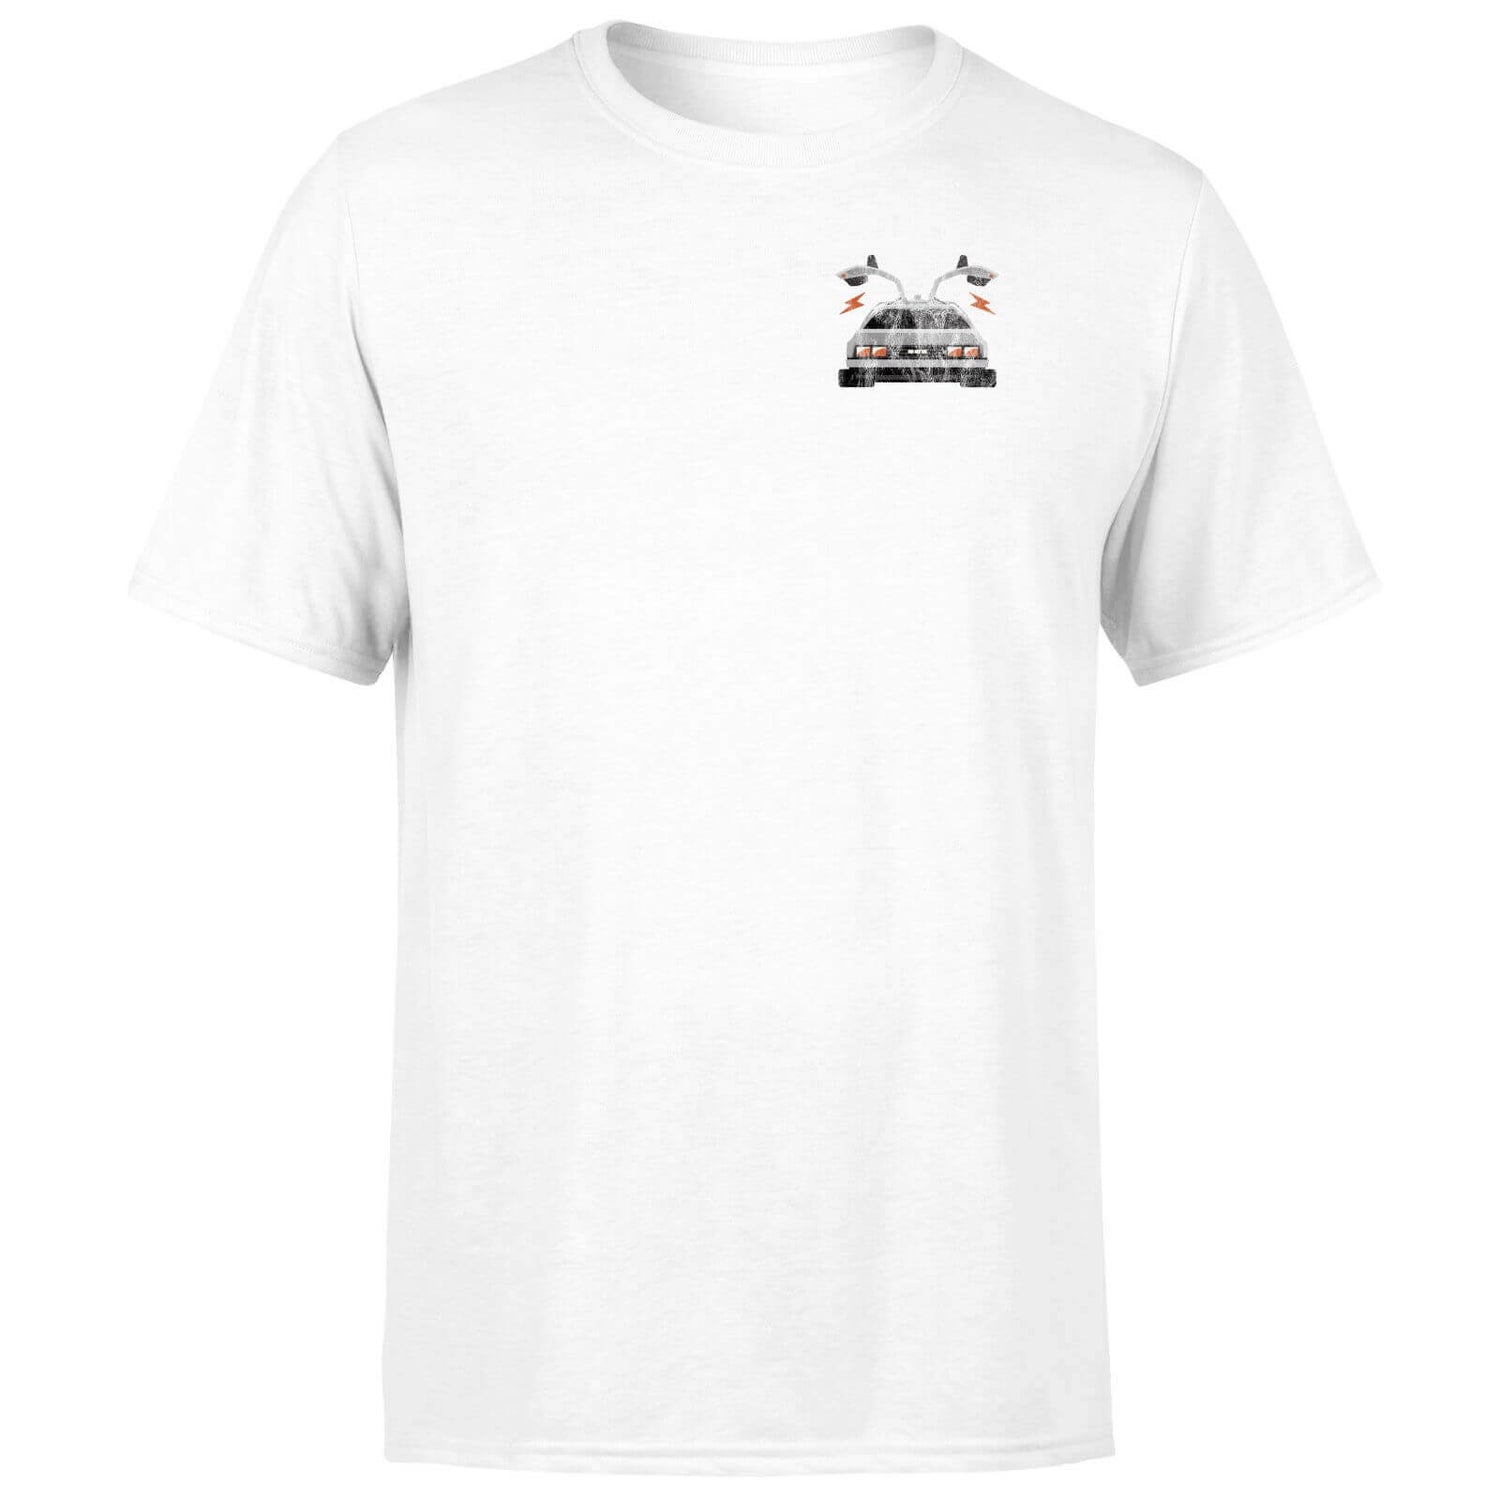 Back To The Future No Concept Of Time Men's T-Shirt - White